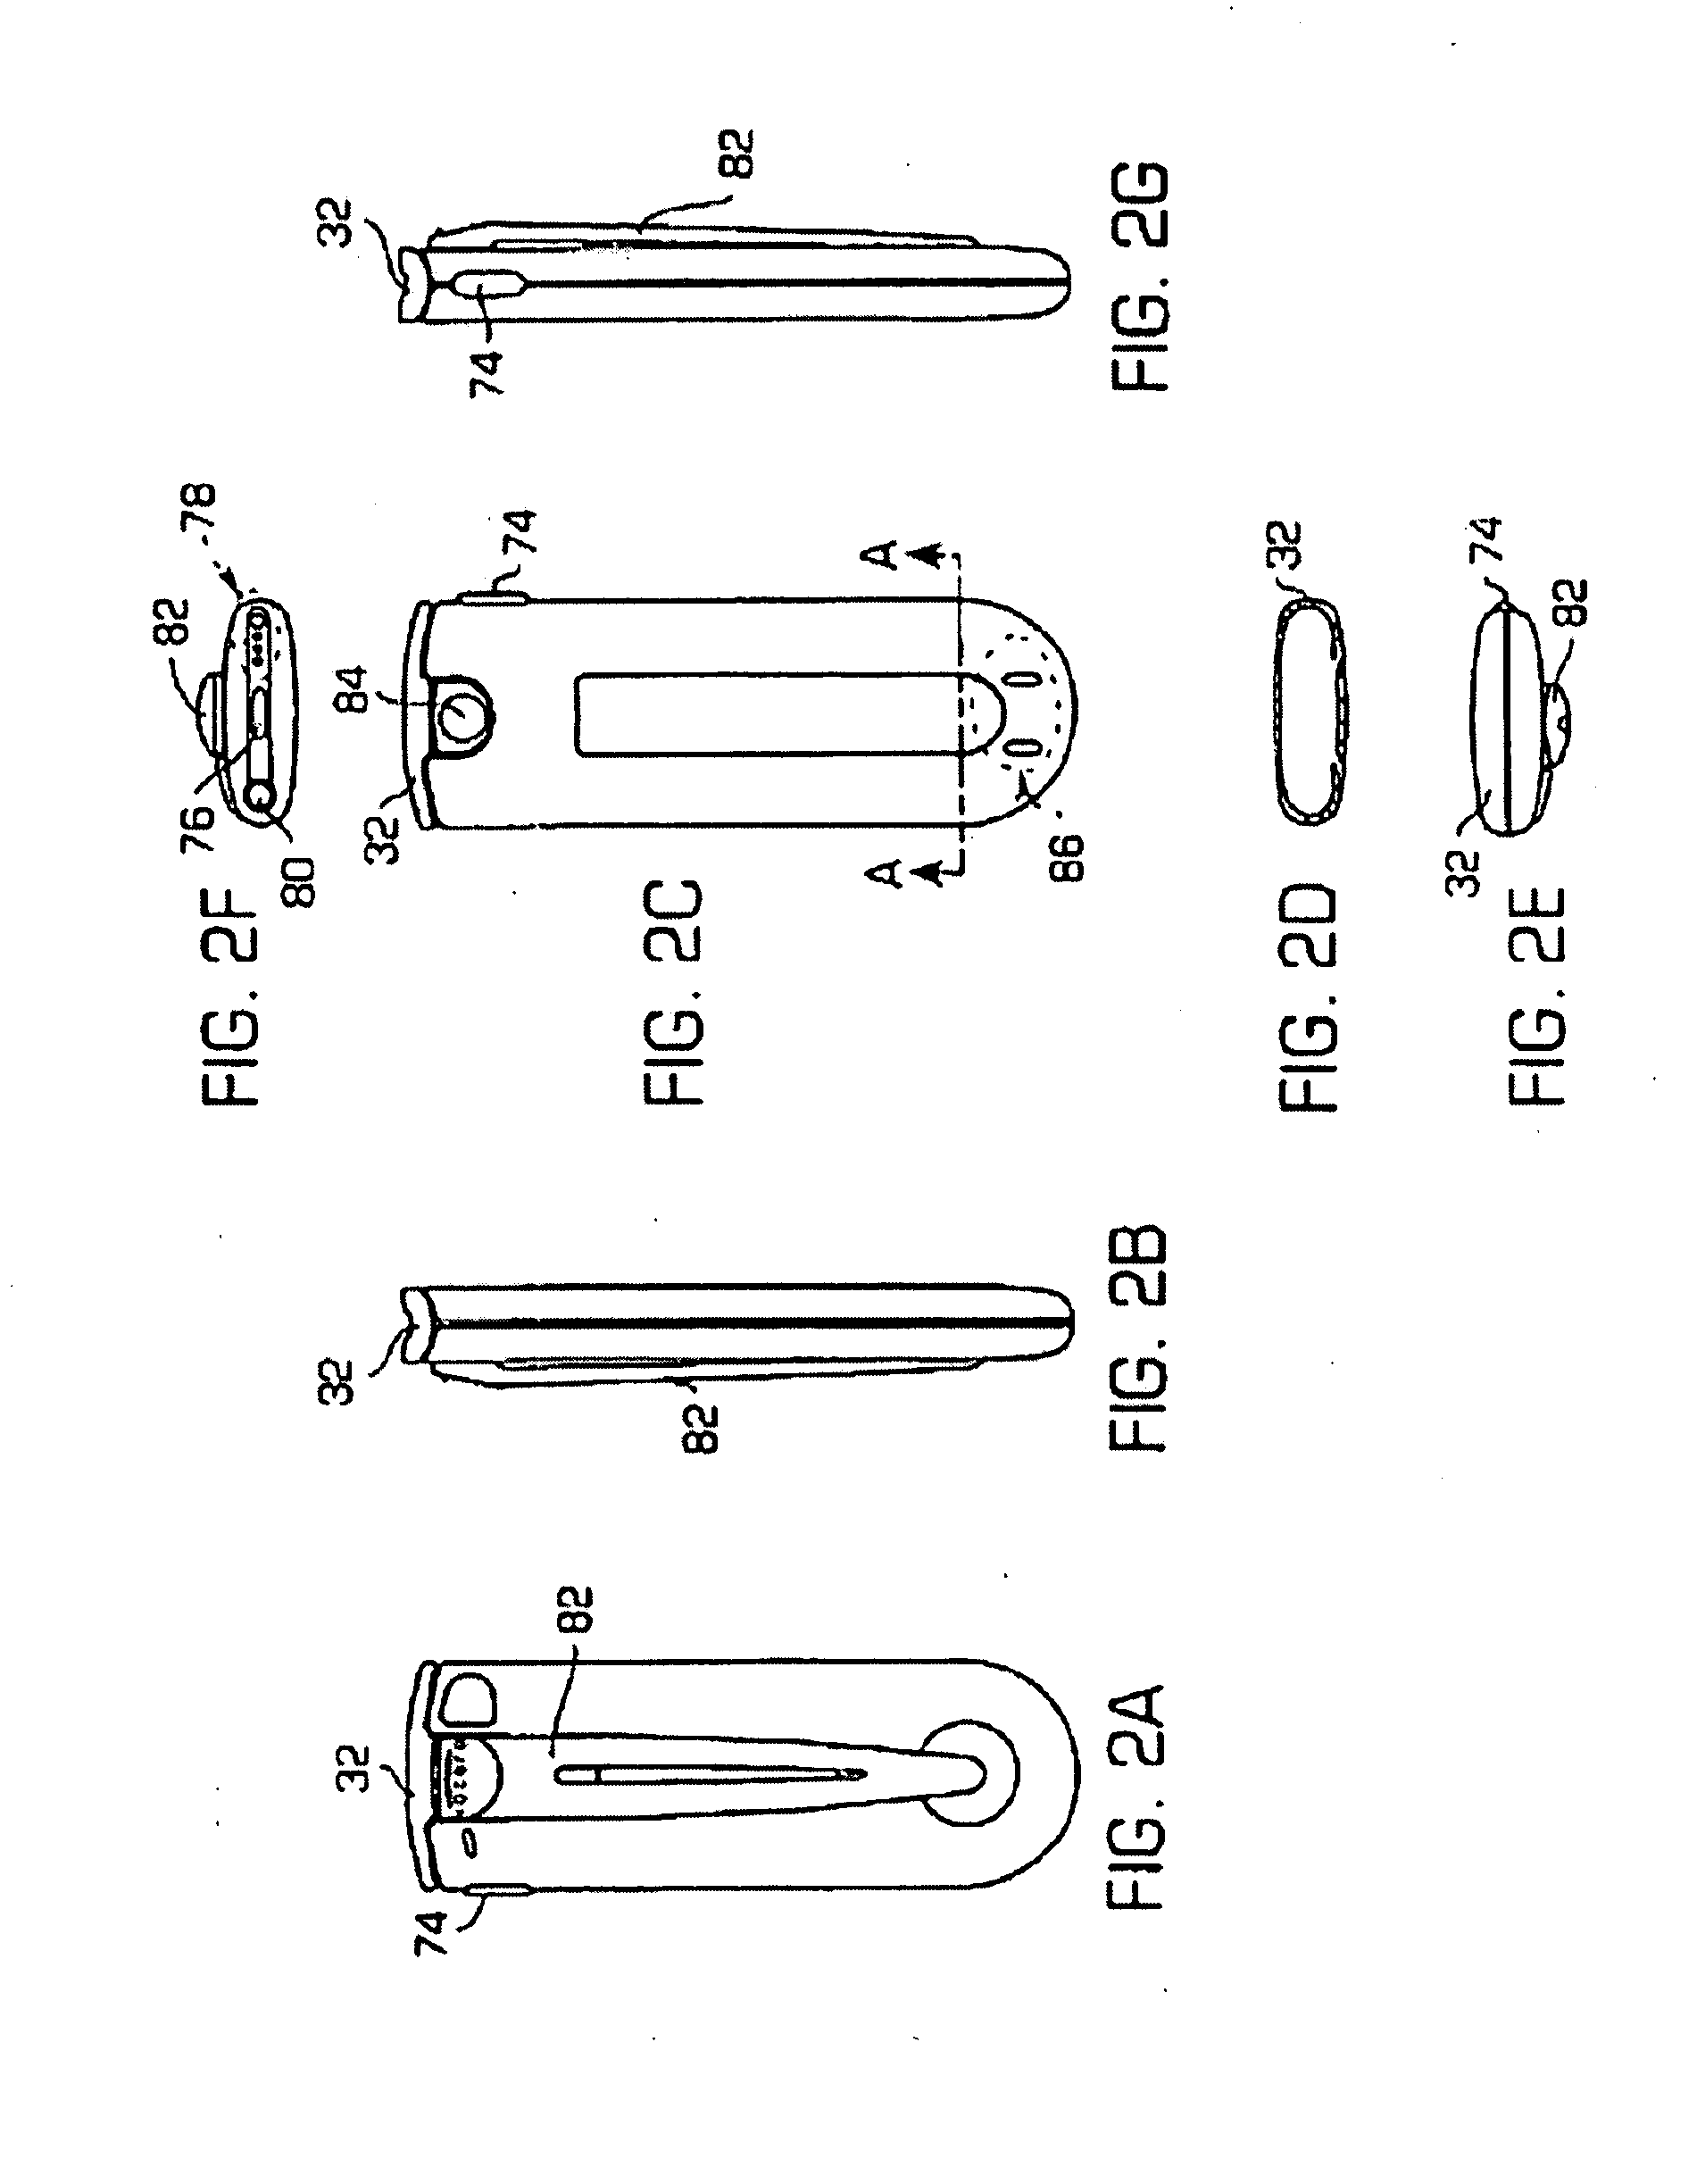 Voice-controlled communications system and method using a badge application